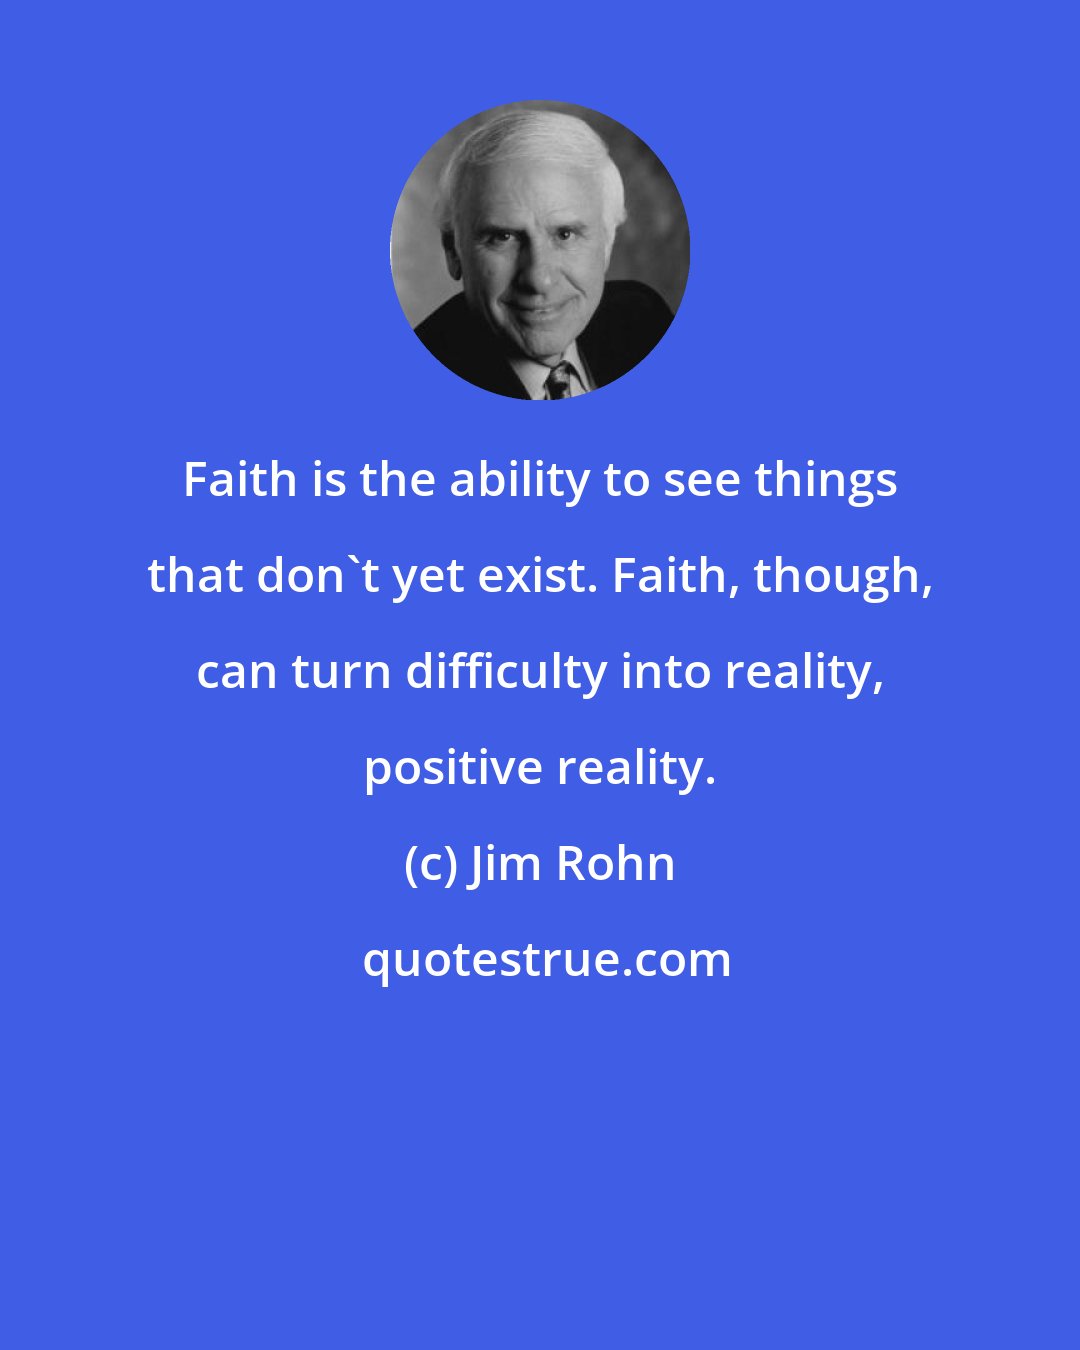 Jim Rohn: Faith is the ability to see things that don't yet exist. Faith, though, can turn difficulty into reality, positive reality.